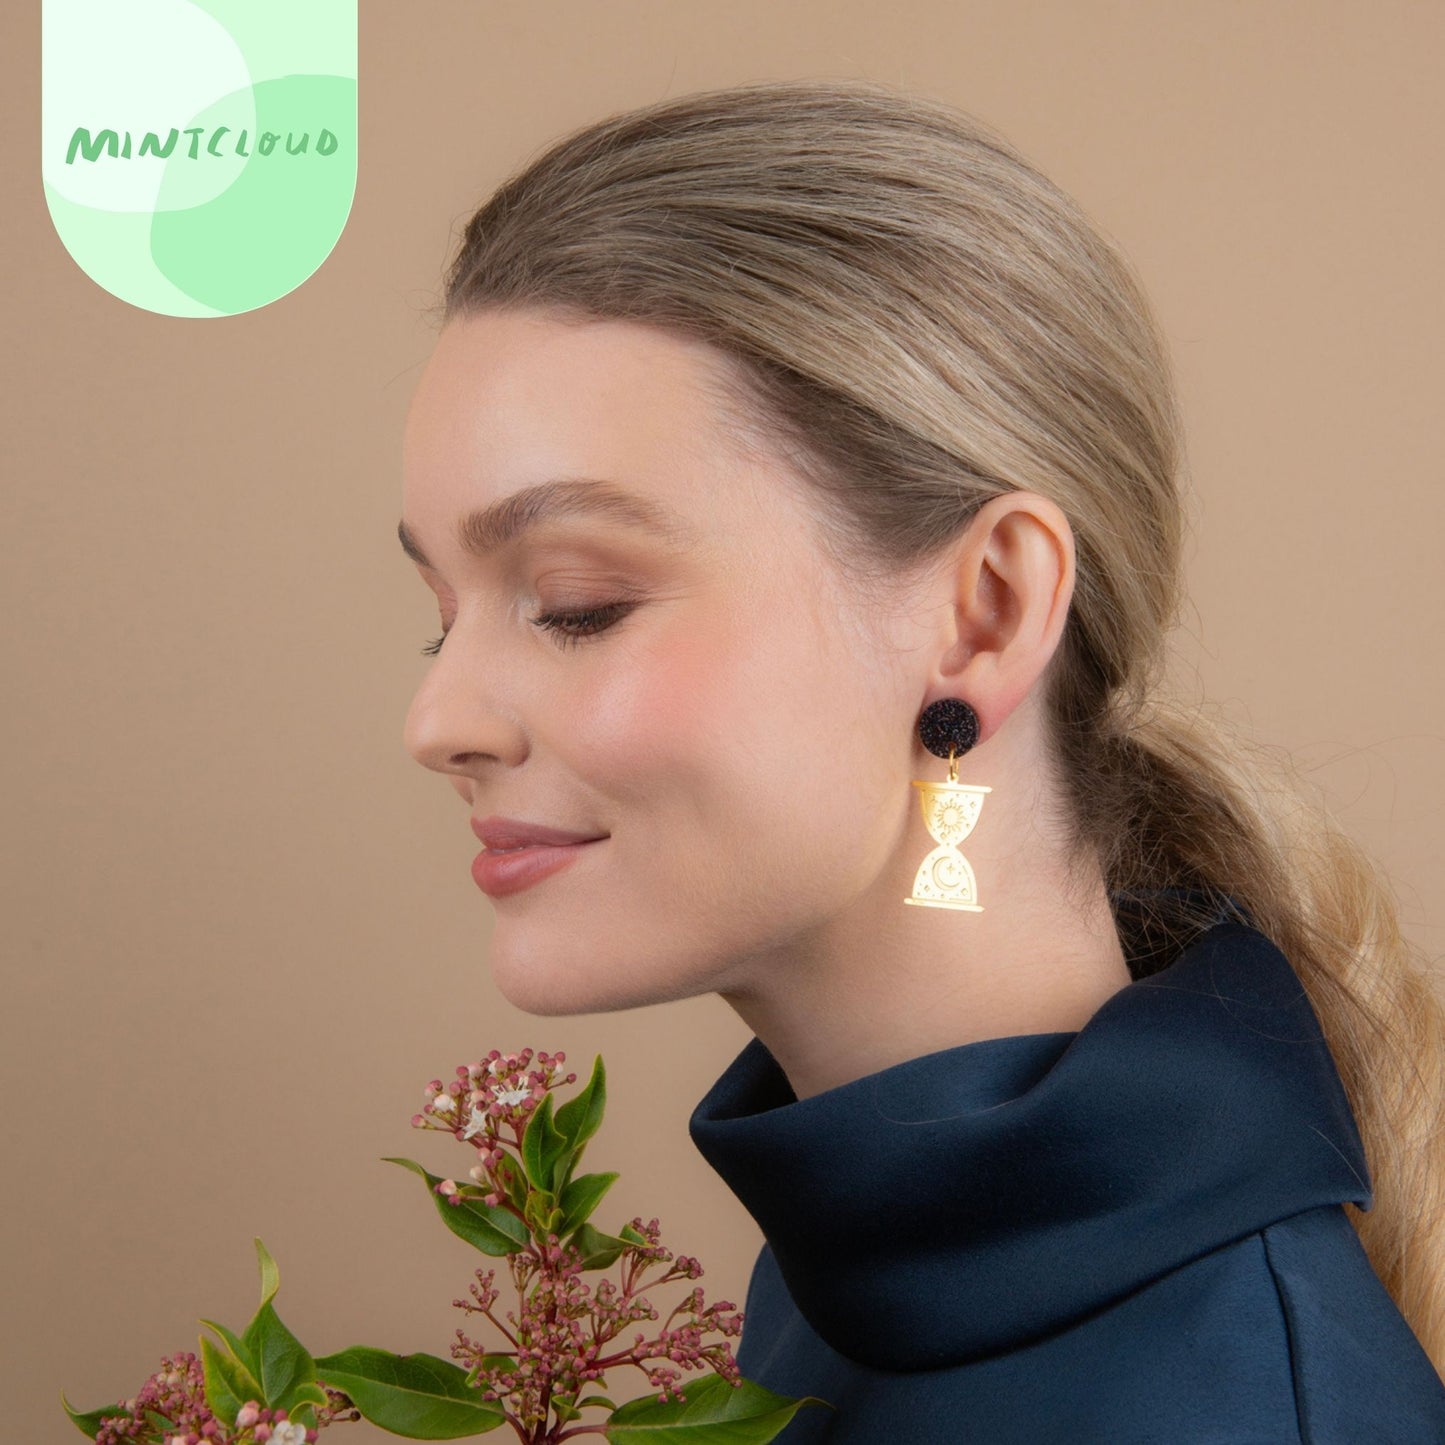 Brass Dangles - Mystic Hourglass From Mintcloud Studio, an online jewellery store based in Adelaide South Australia